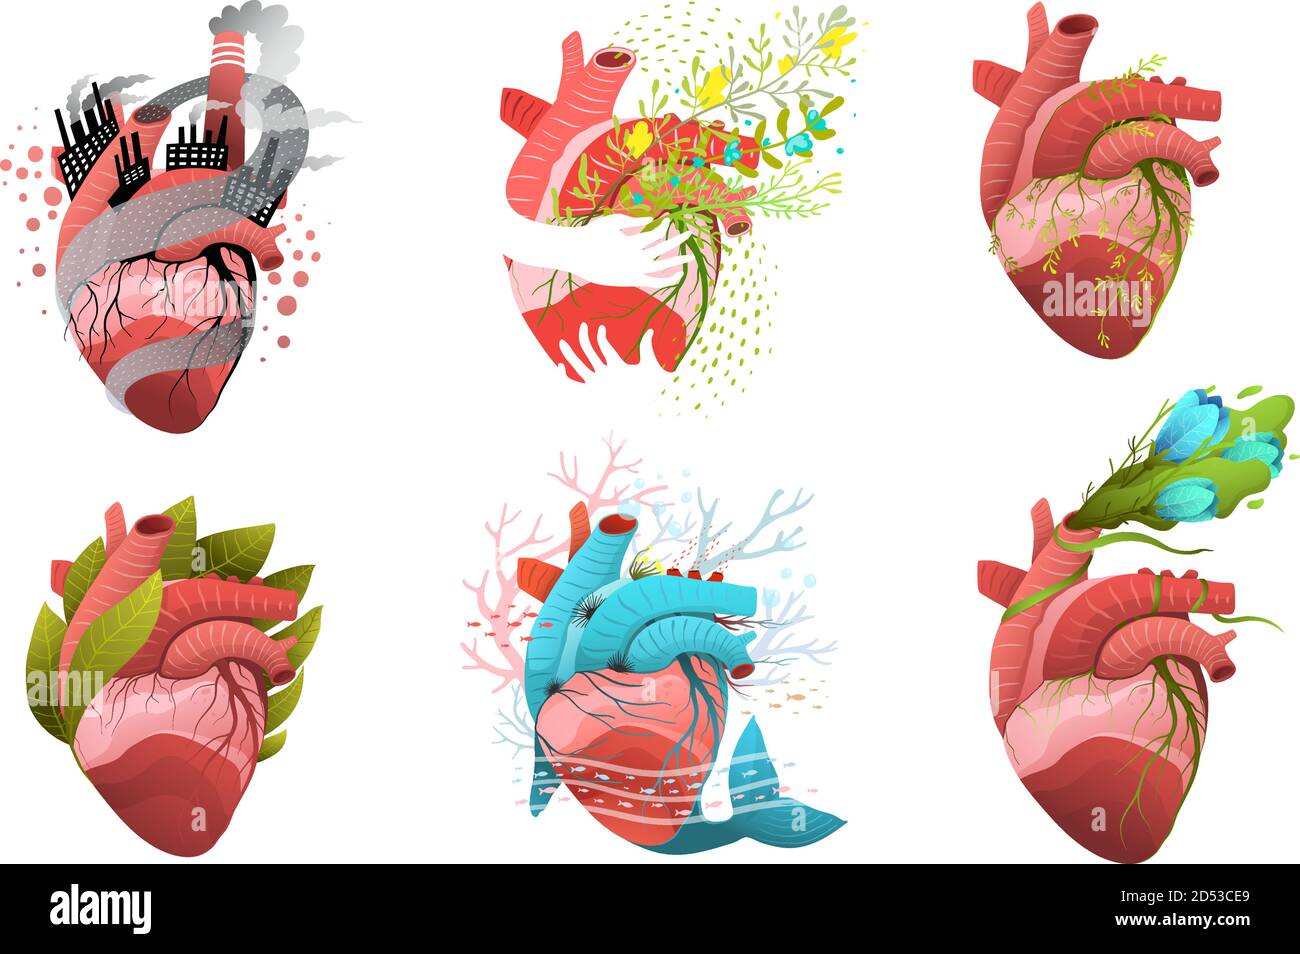 Heart Health and Cardiology Concepts Designs Stock Vector